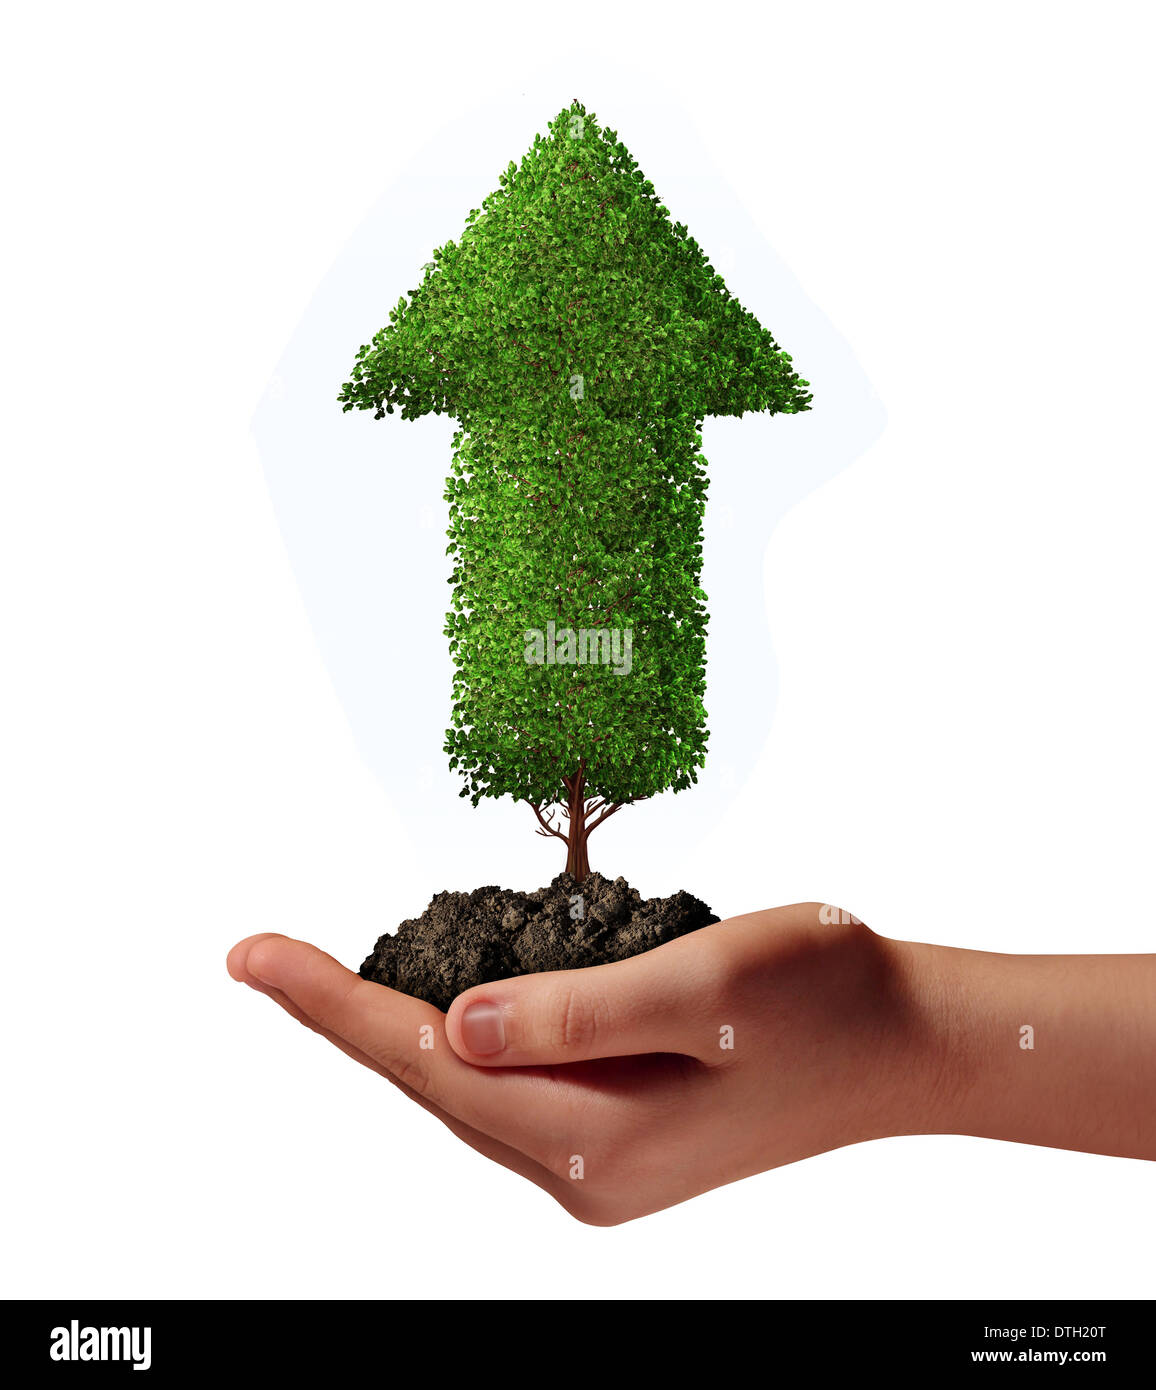 Thriving opportunity business success concept as a human hand holding an upward growing arrow tree in soil as a metaphor for future wealth and prosperity growth on a white background. Stock Photo